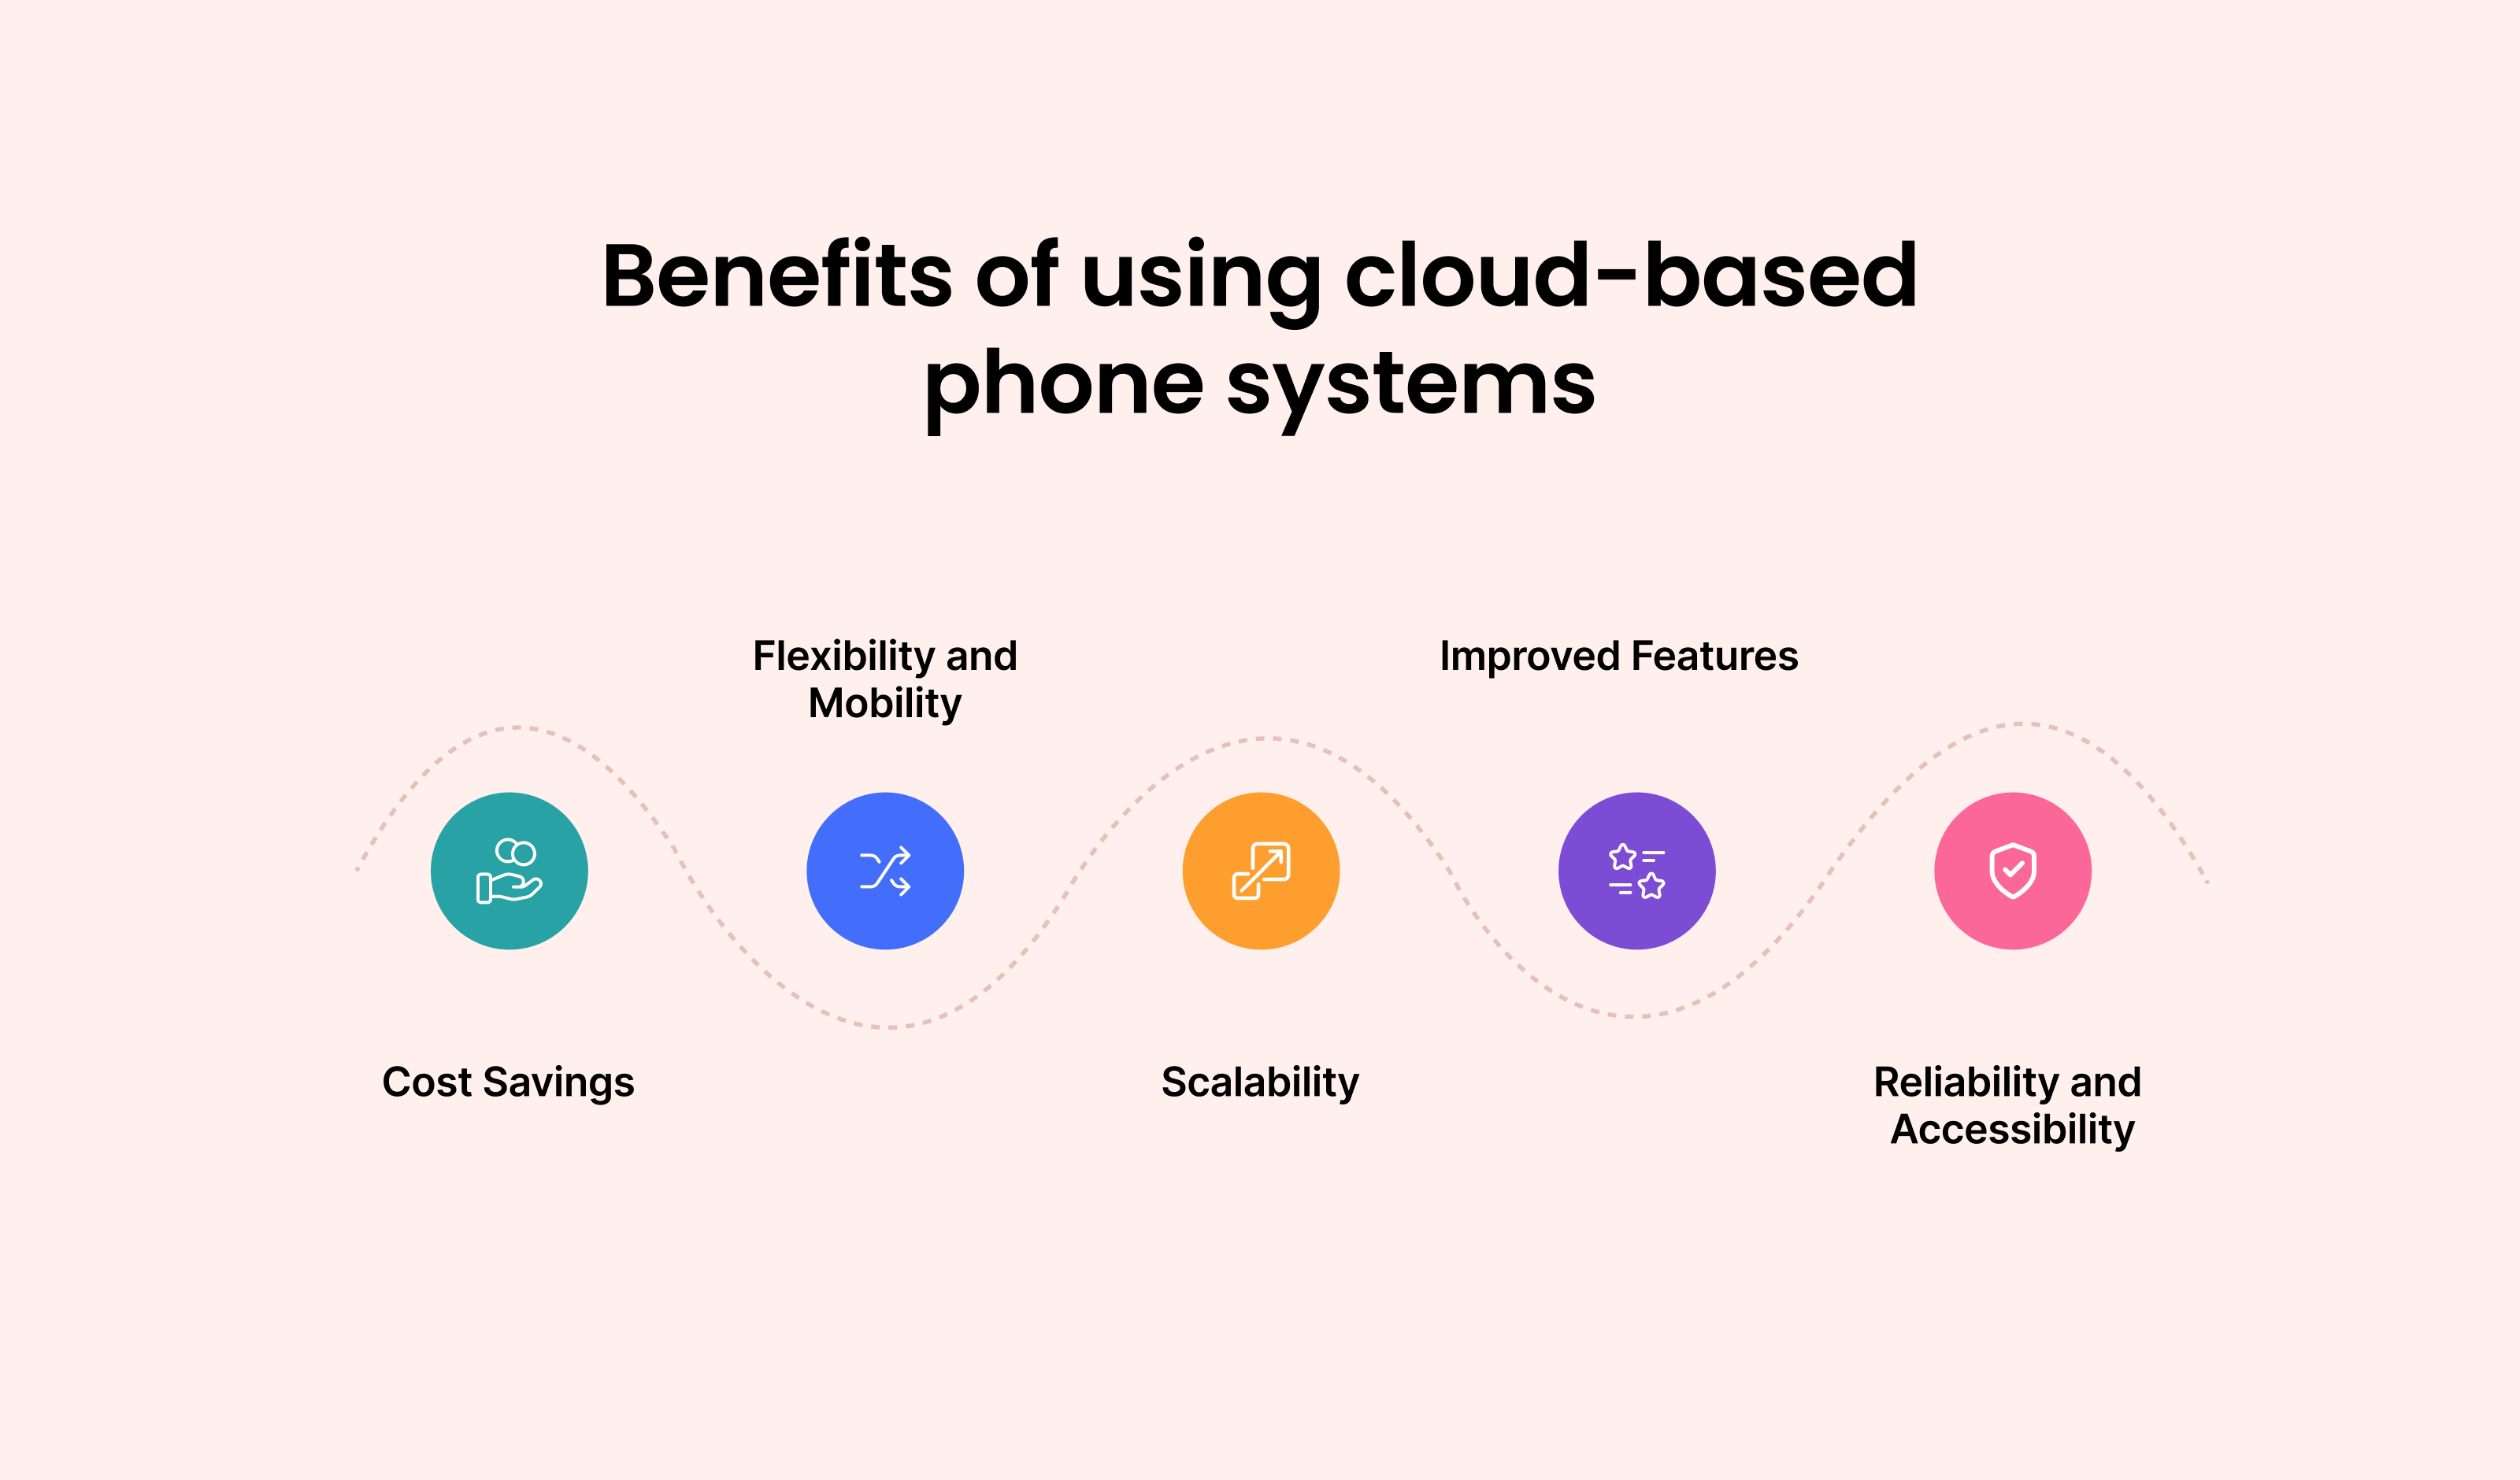 Benefits of Using Cloud-Based Phone Systems: